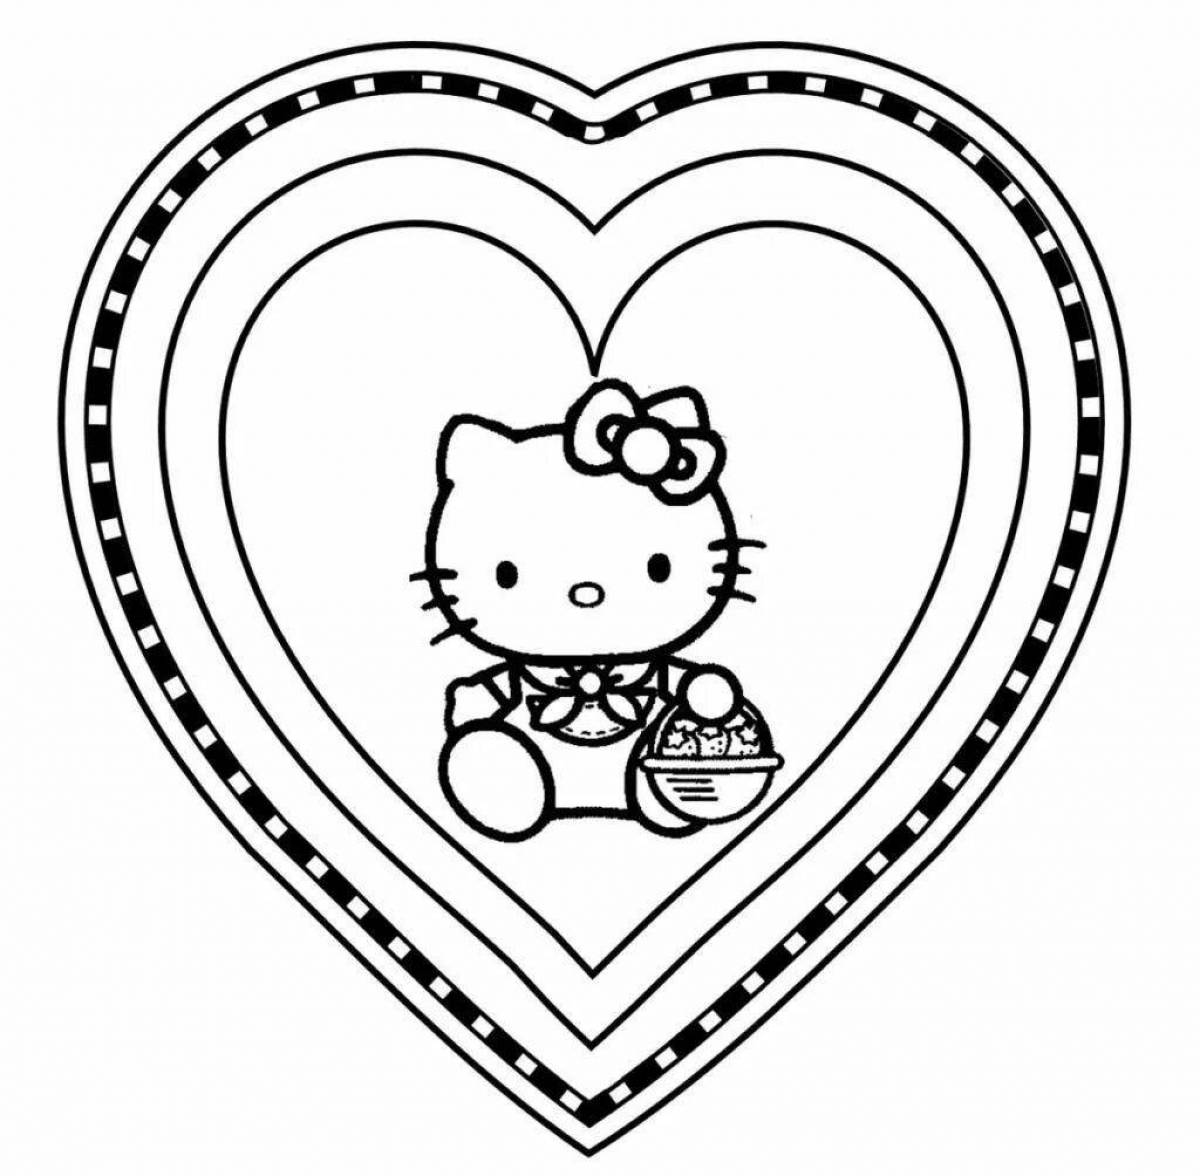 Coloring book bright cat with a heart